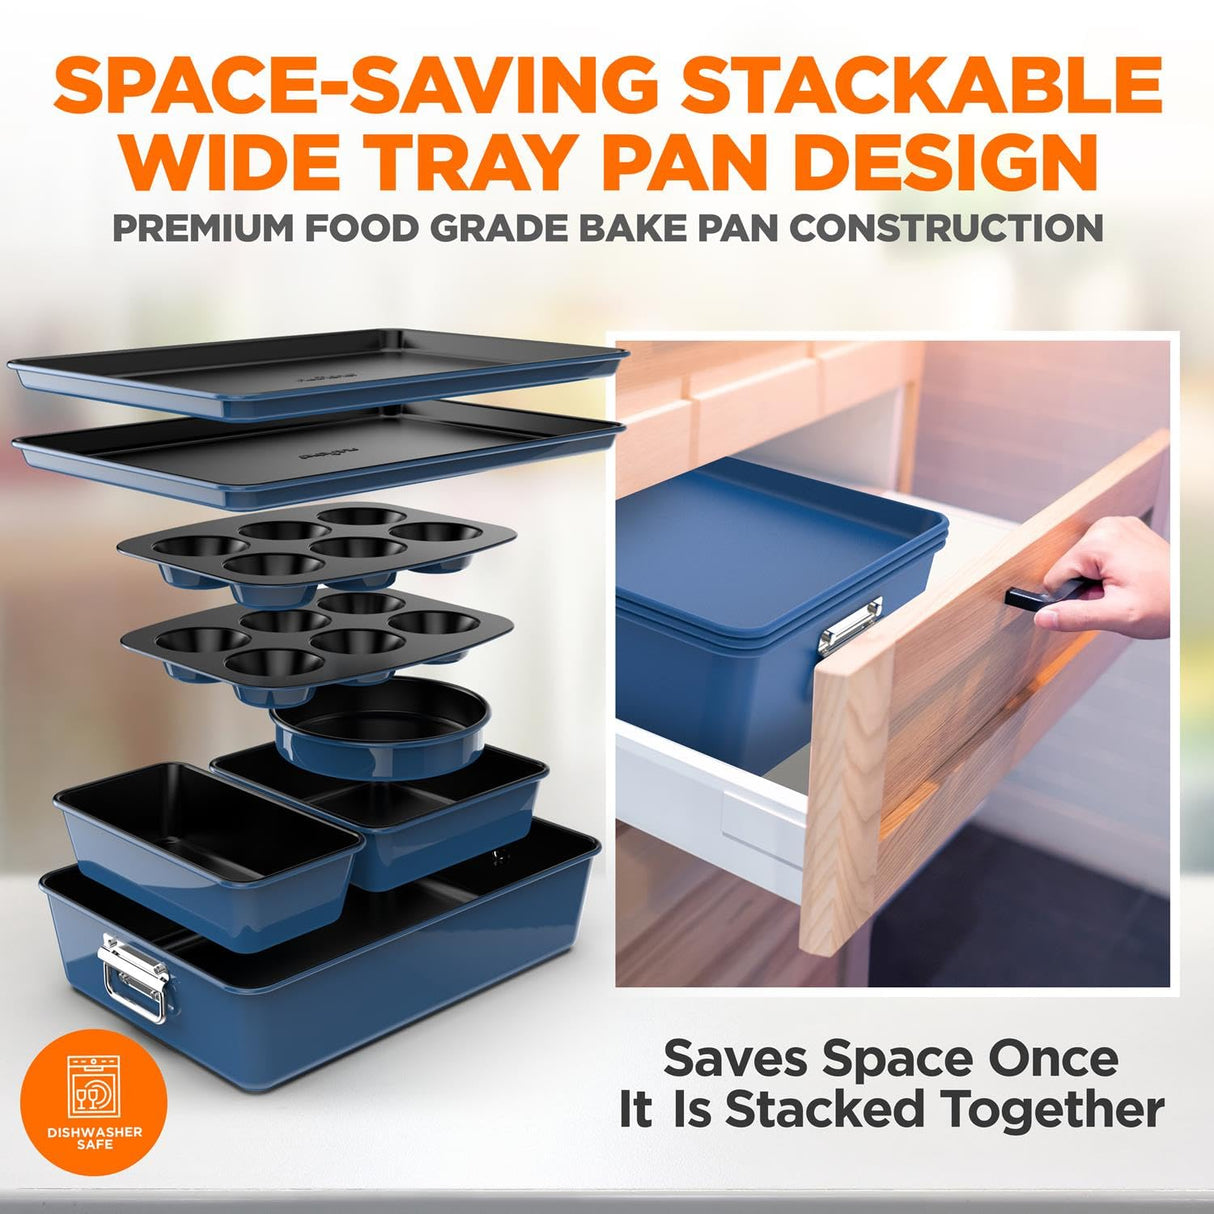 NutriChef 8-Piece Nonstick Stackable Bakeware Set - PFOA, PFOS, PTFE Free Baking Tray Set w/Non-Stick Coating, 450°F Oven Safe, Round Cake, Loaf, Muffin, Wide/Square Pans, Cookie Sheet (Blue)